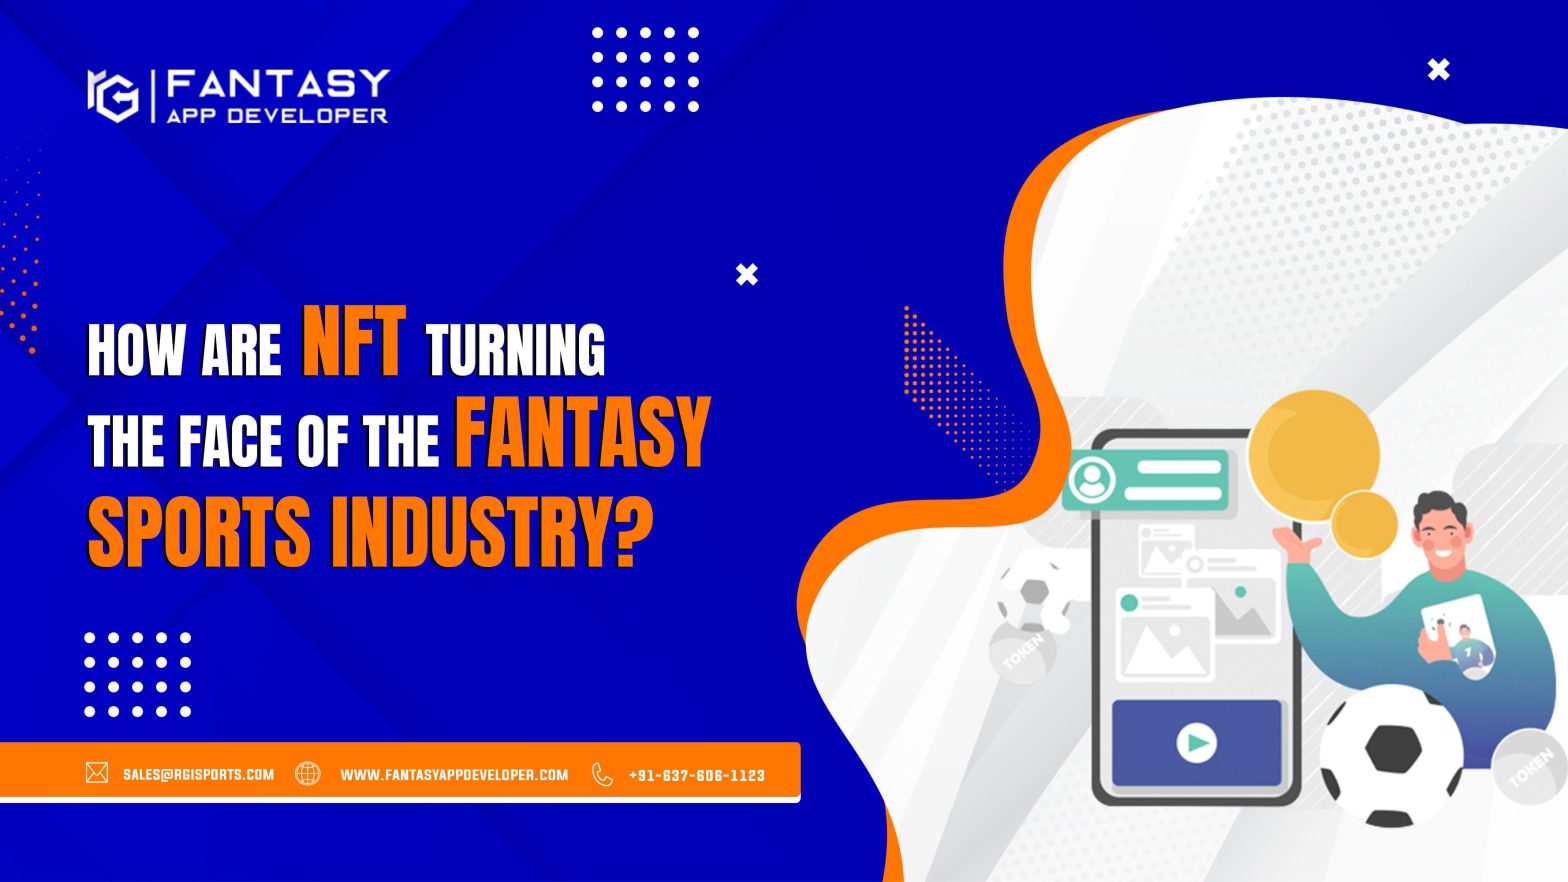 How are NFT turning the face of the Fantasy Sports Industry